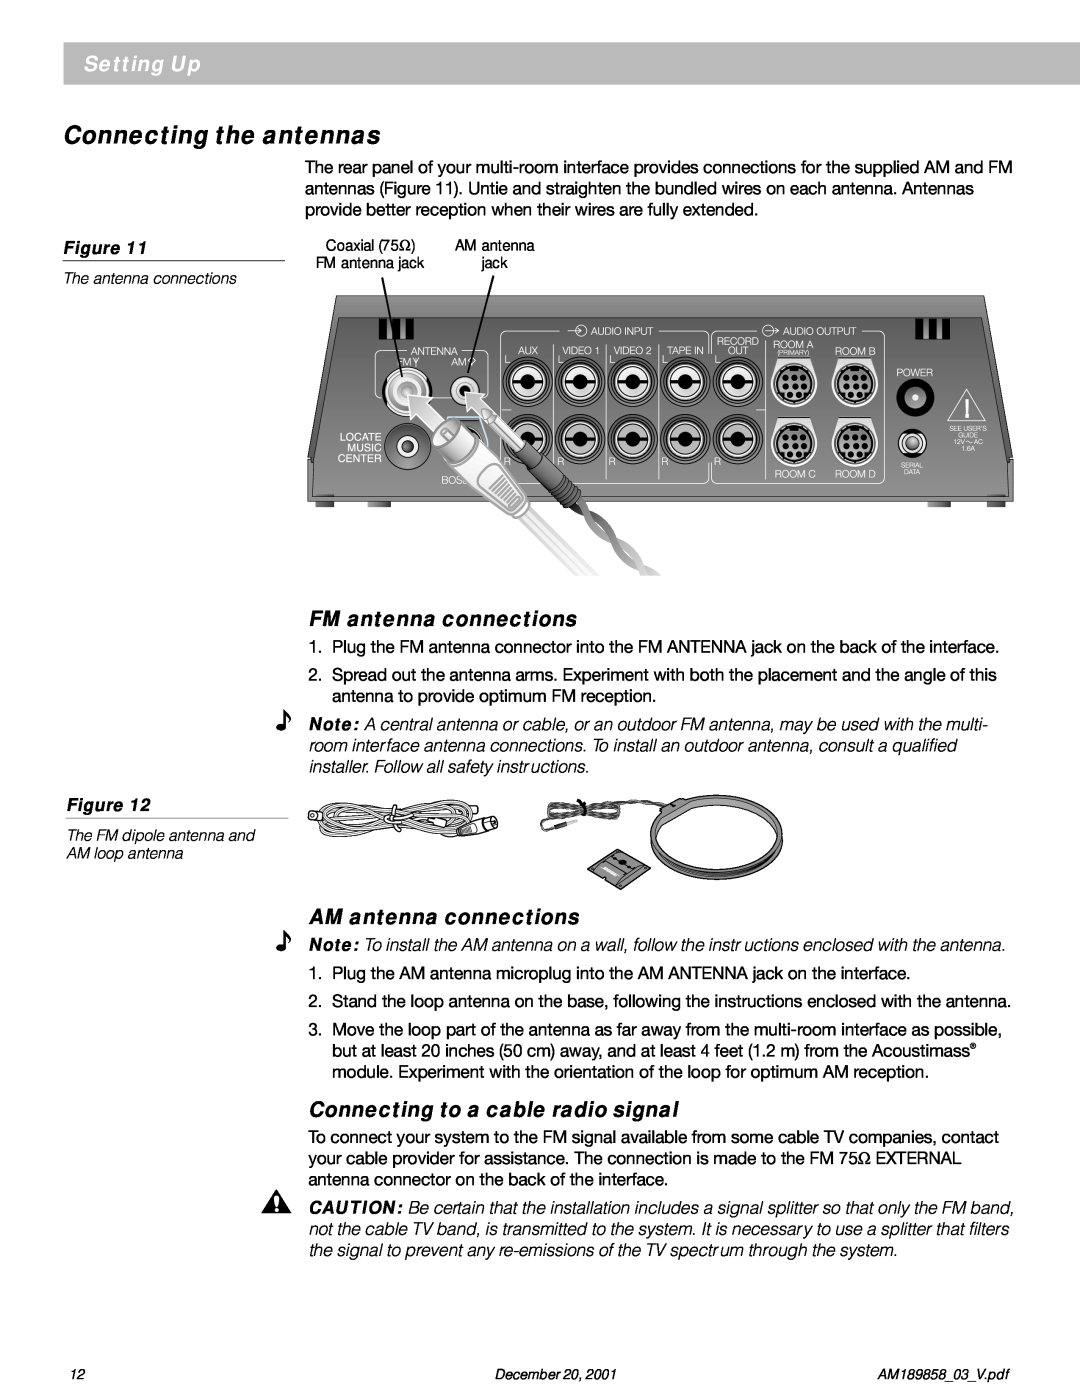 Bose 40 manual Setting Up, FM antenna connections, AM antenna connections, Connecting to a cable radio signal, Figure 